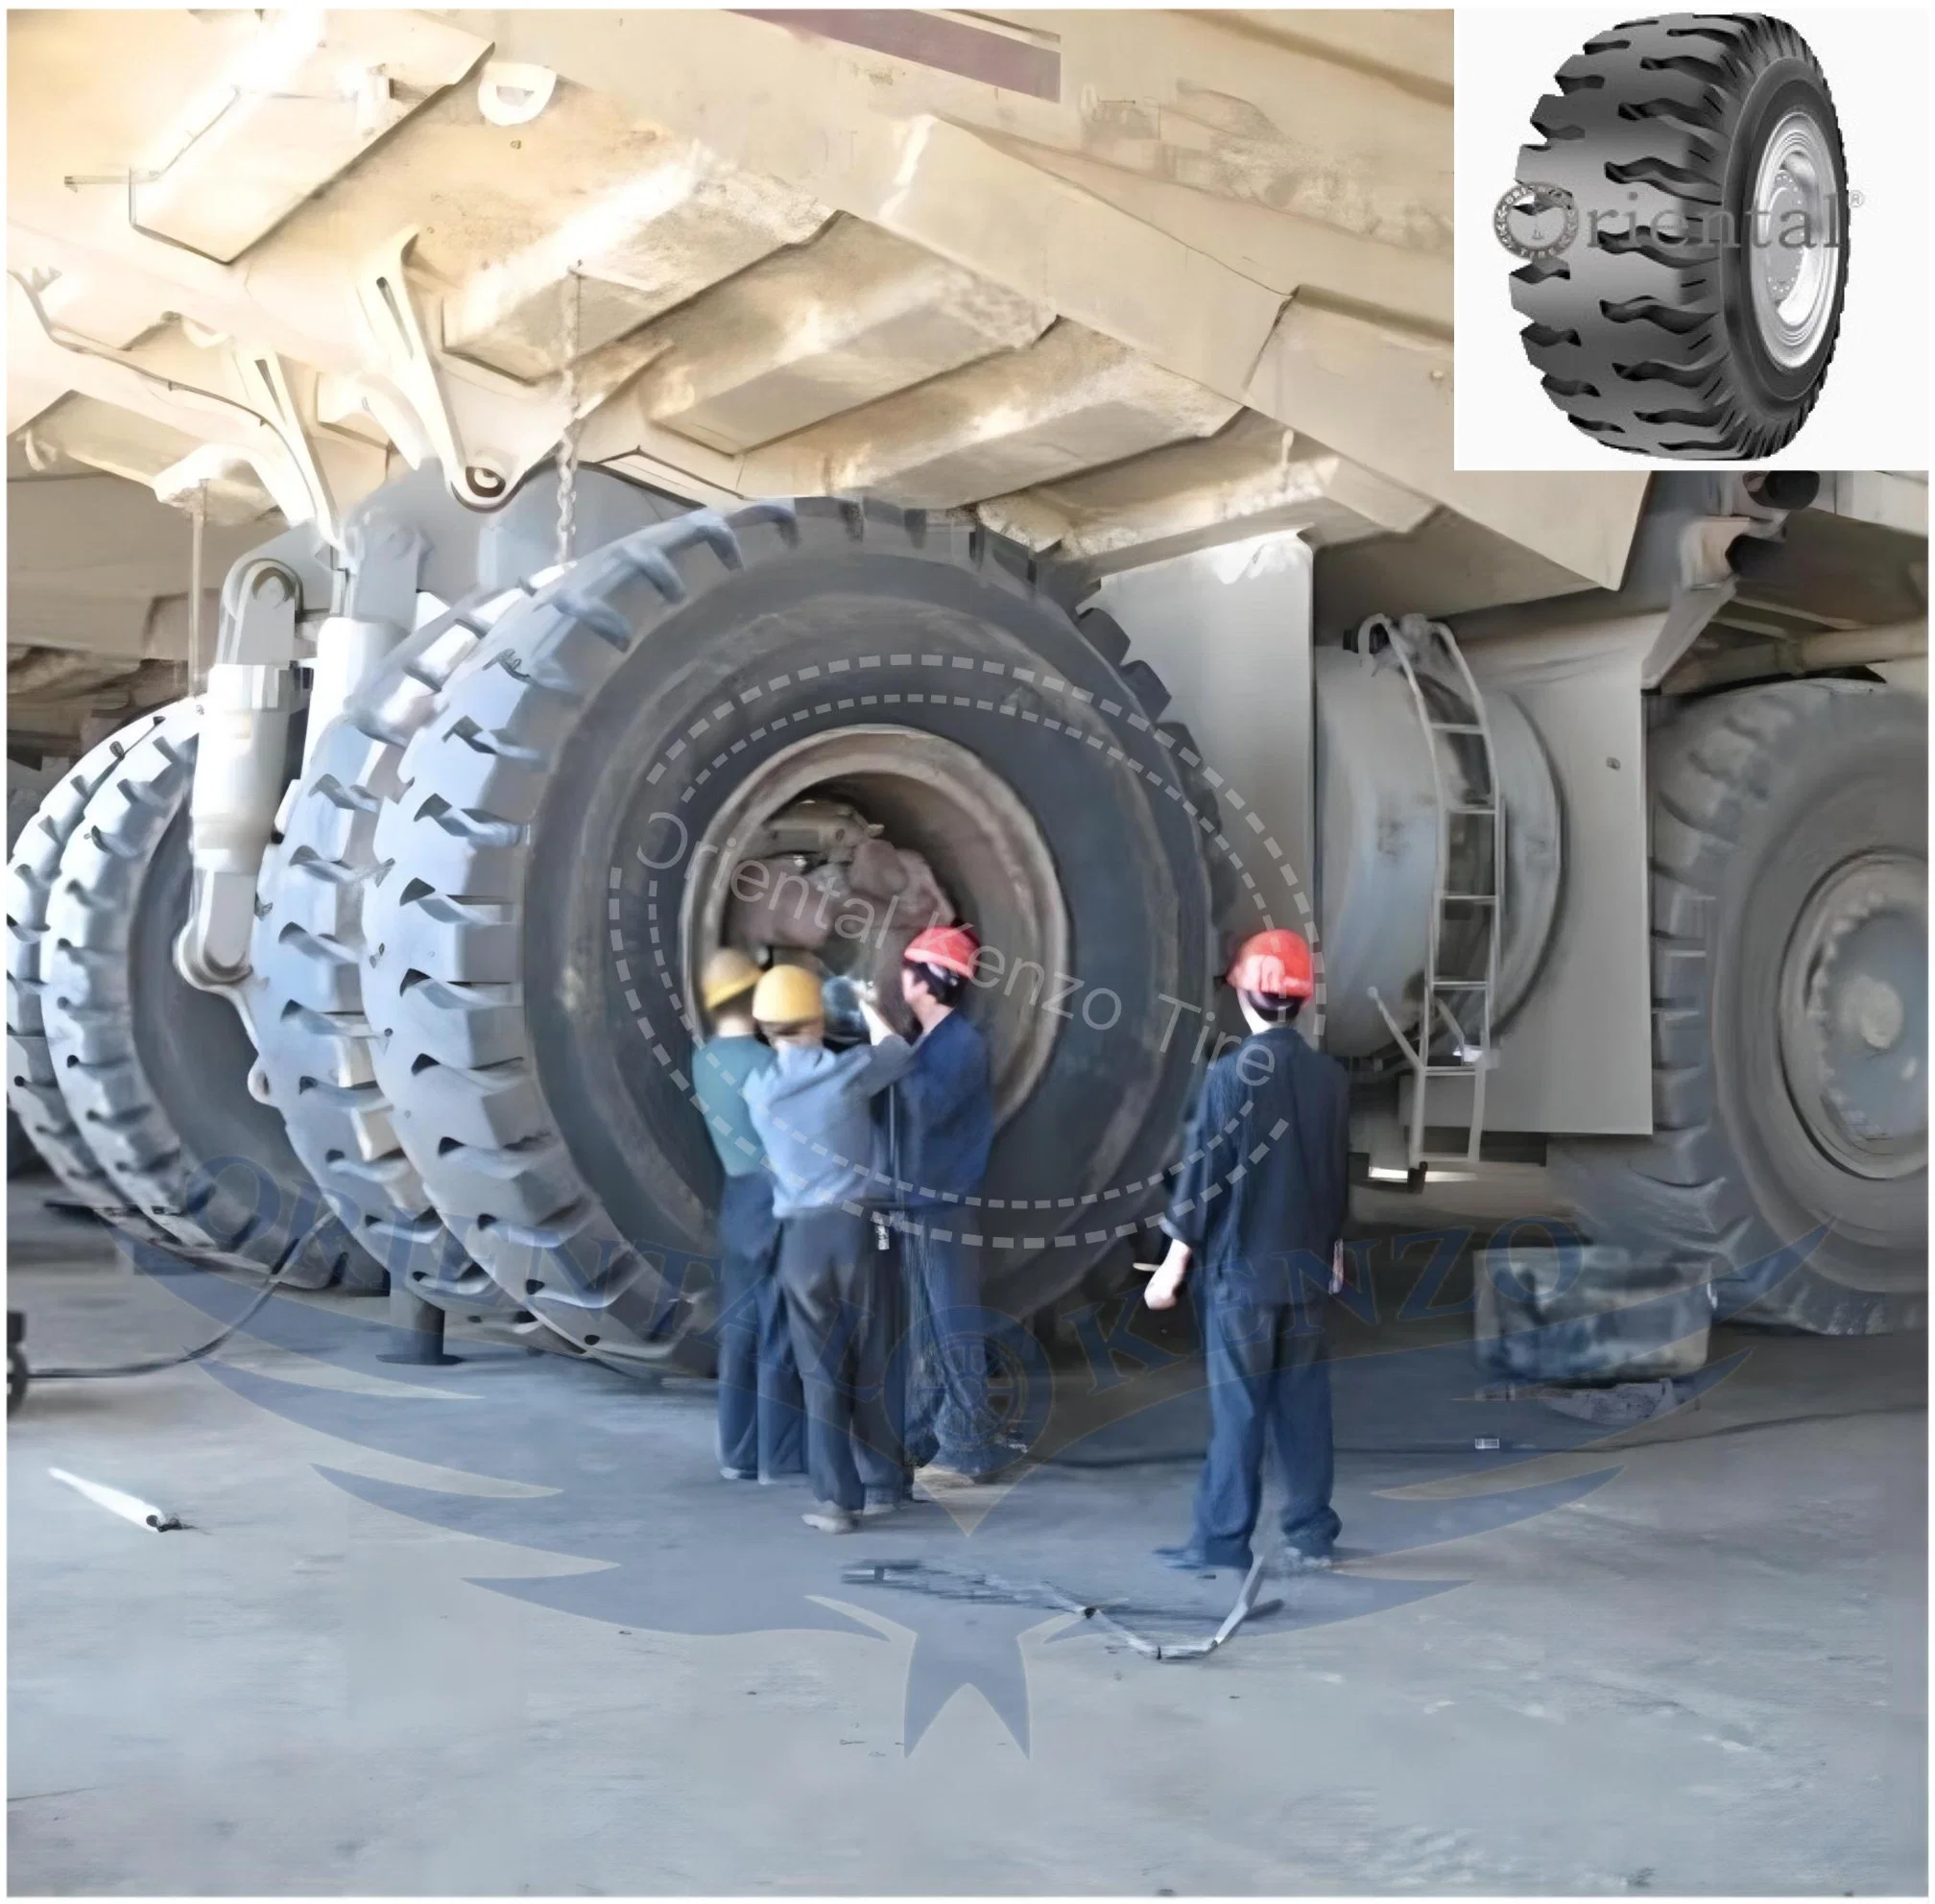 OTR Tyre off The Road Tire, Bias Tyre for Industrial Machine and Heavy Equipment, Skid Steer. China Tyre Factory Price. Tyres for Crane and Excavating Truck